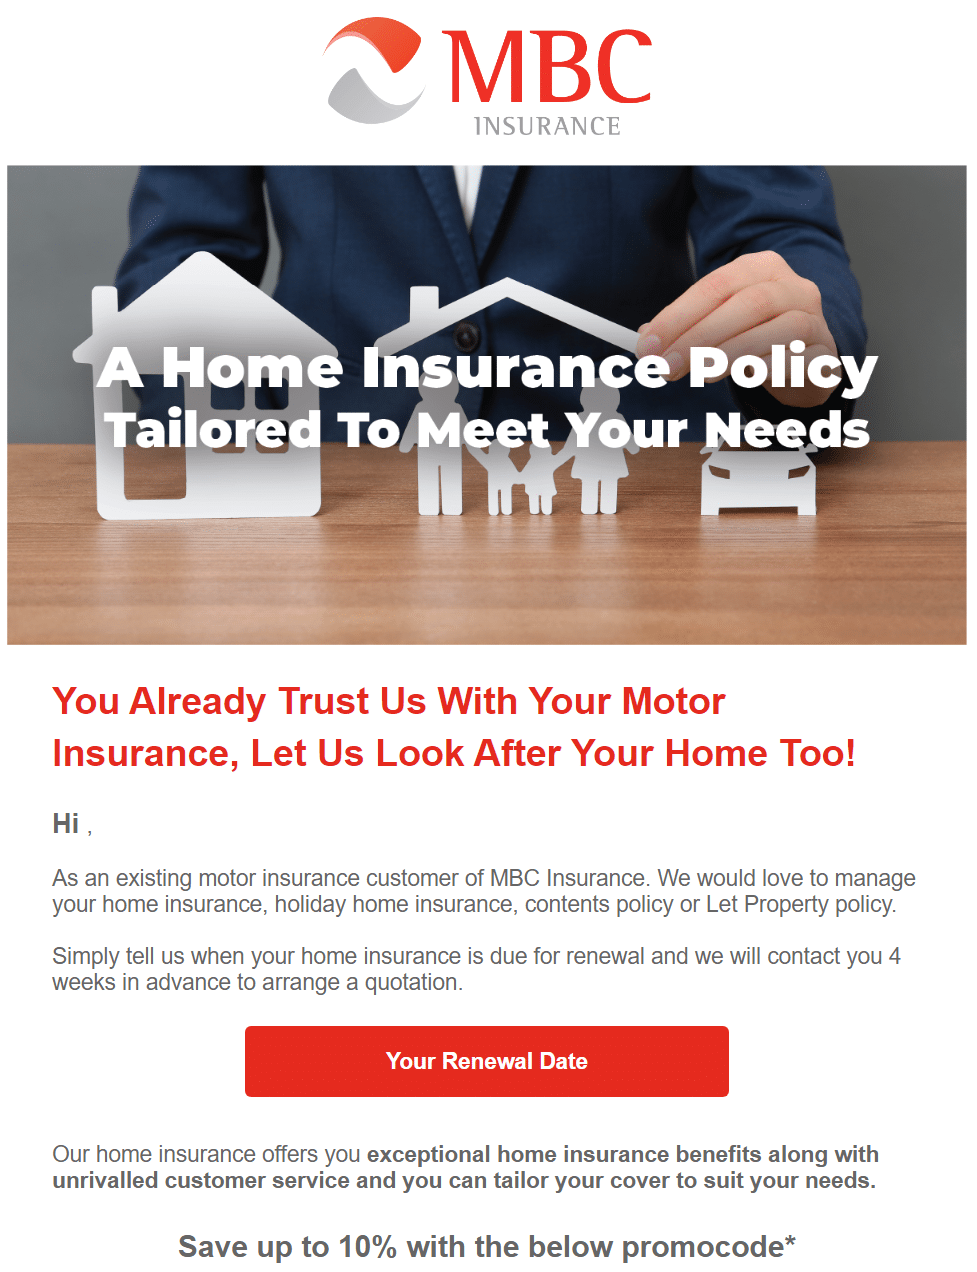 Post purchase email - cross sell - MBC Insurance